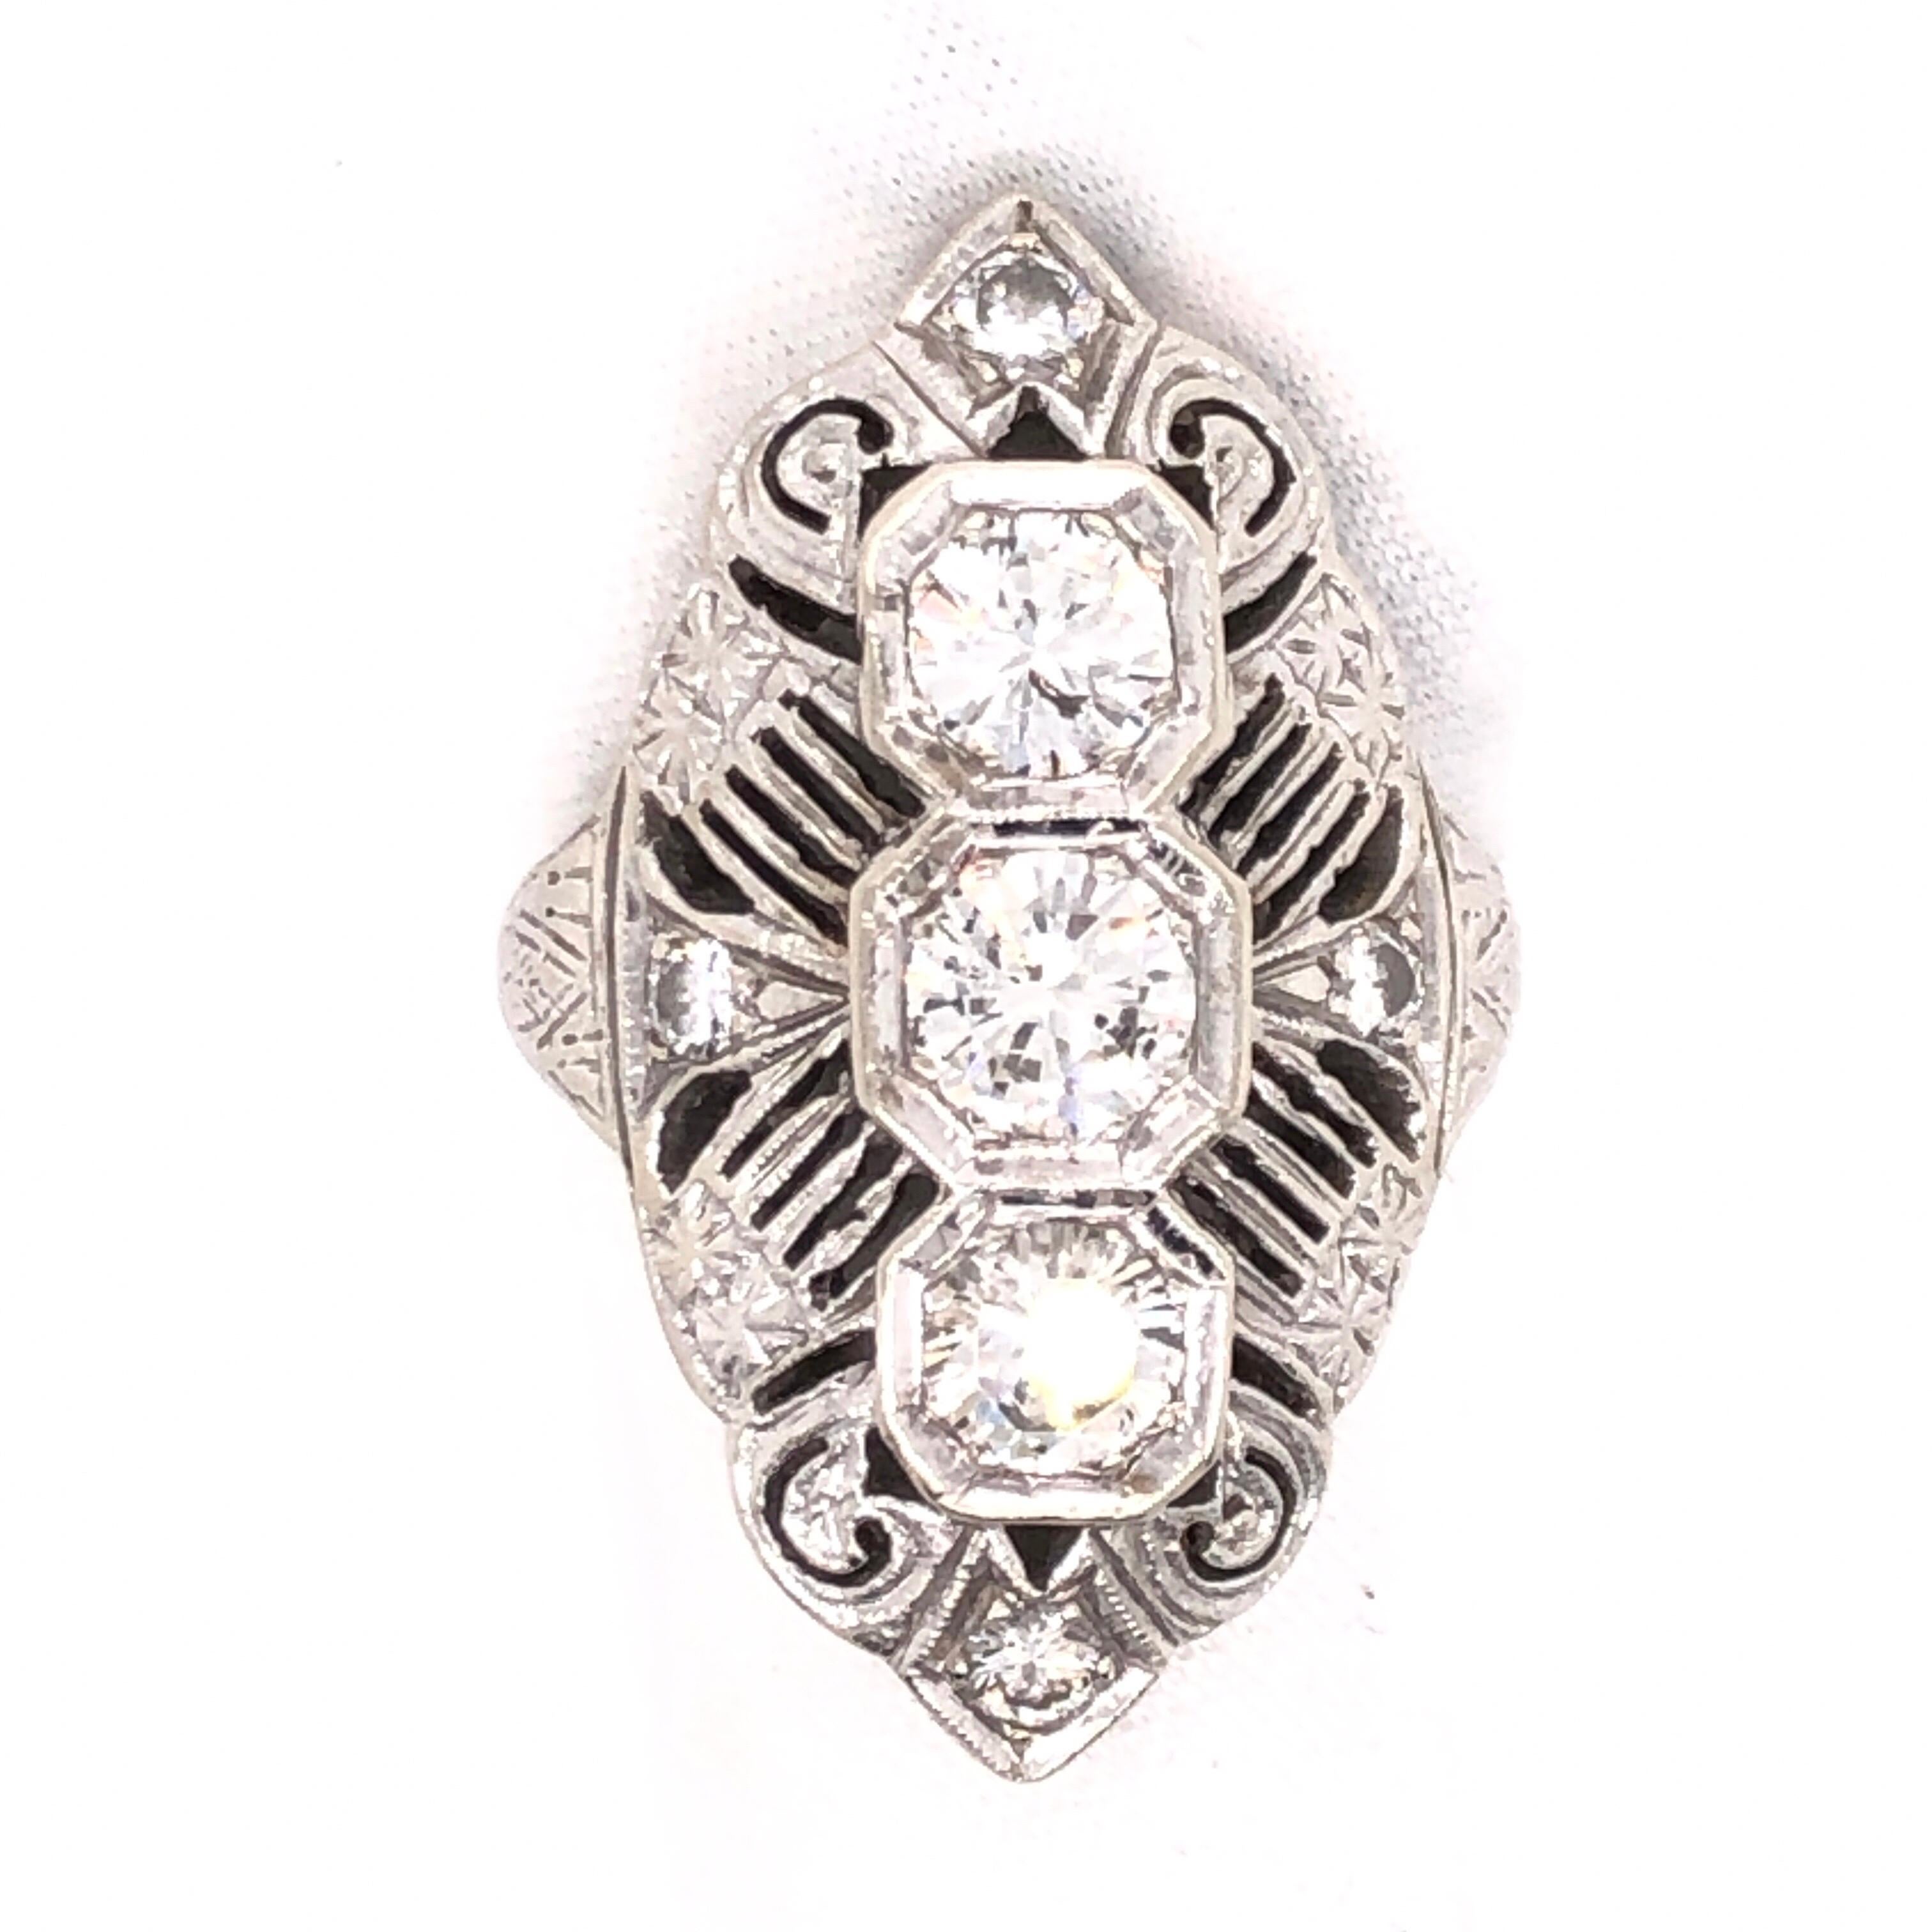 Bring in the 20's (yes it is this coming New Years!) with this circa 1920's Vintage Art Deco style diamond ring. The unique design features 3 center diamonds with 4 accent diamonds (estimated total carat weight of 1.4 CT).

Stamped: 14K

Size:6